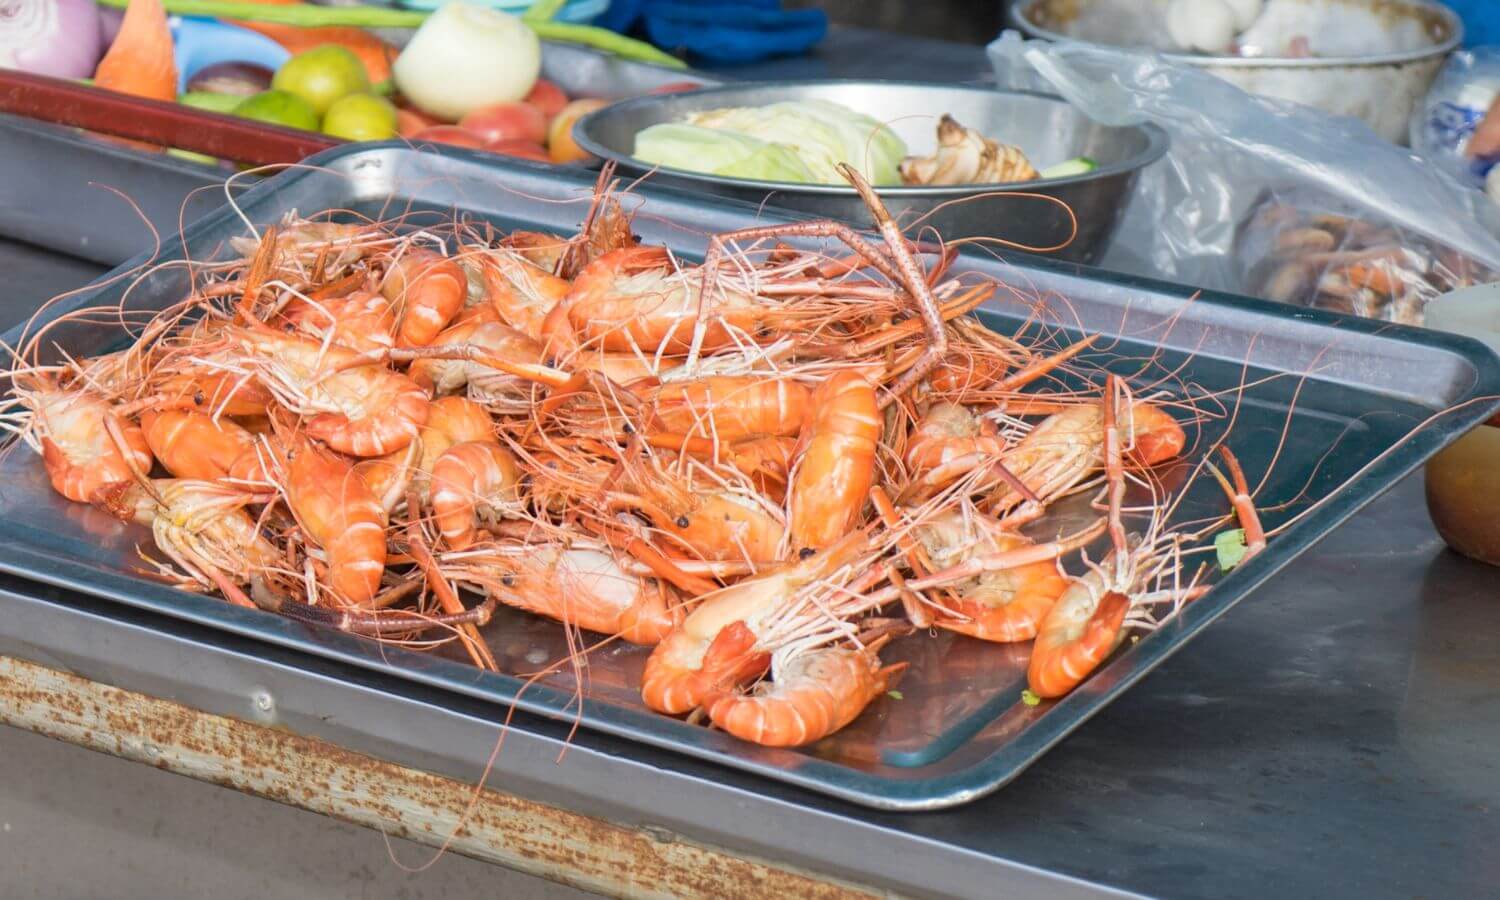 Cooked whole shrimp on a baking tray at the Festival del Cameron.